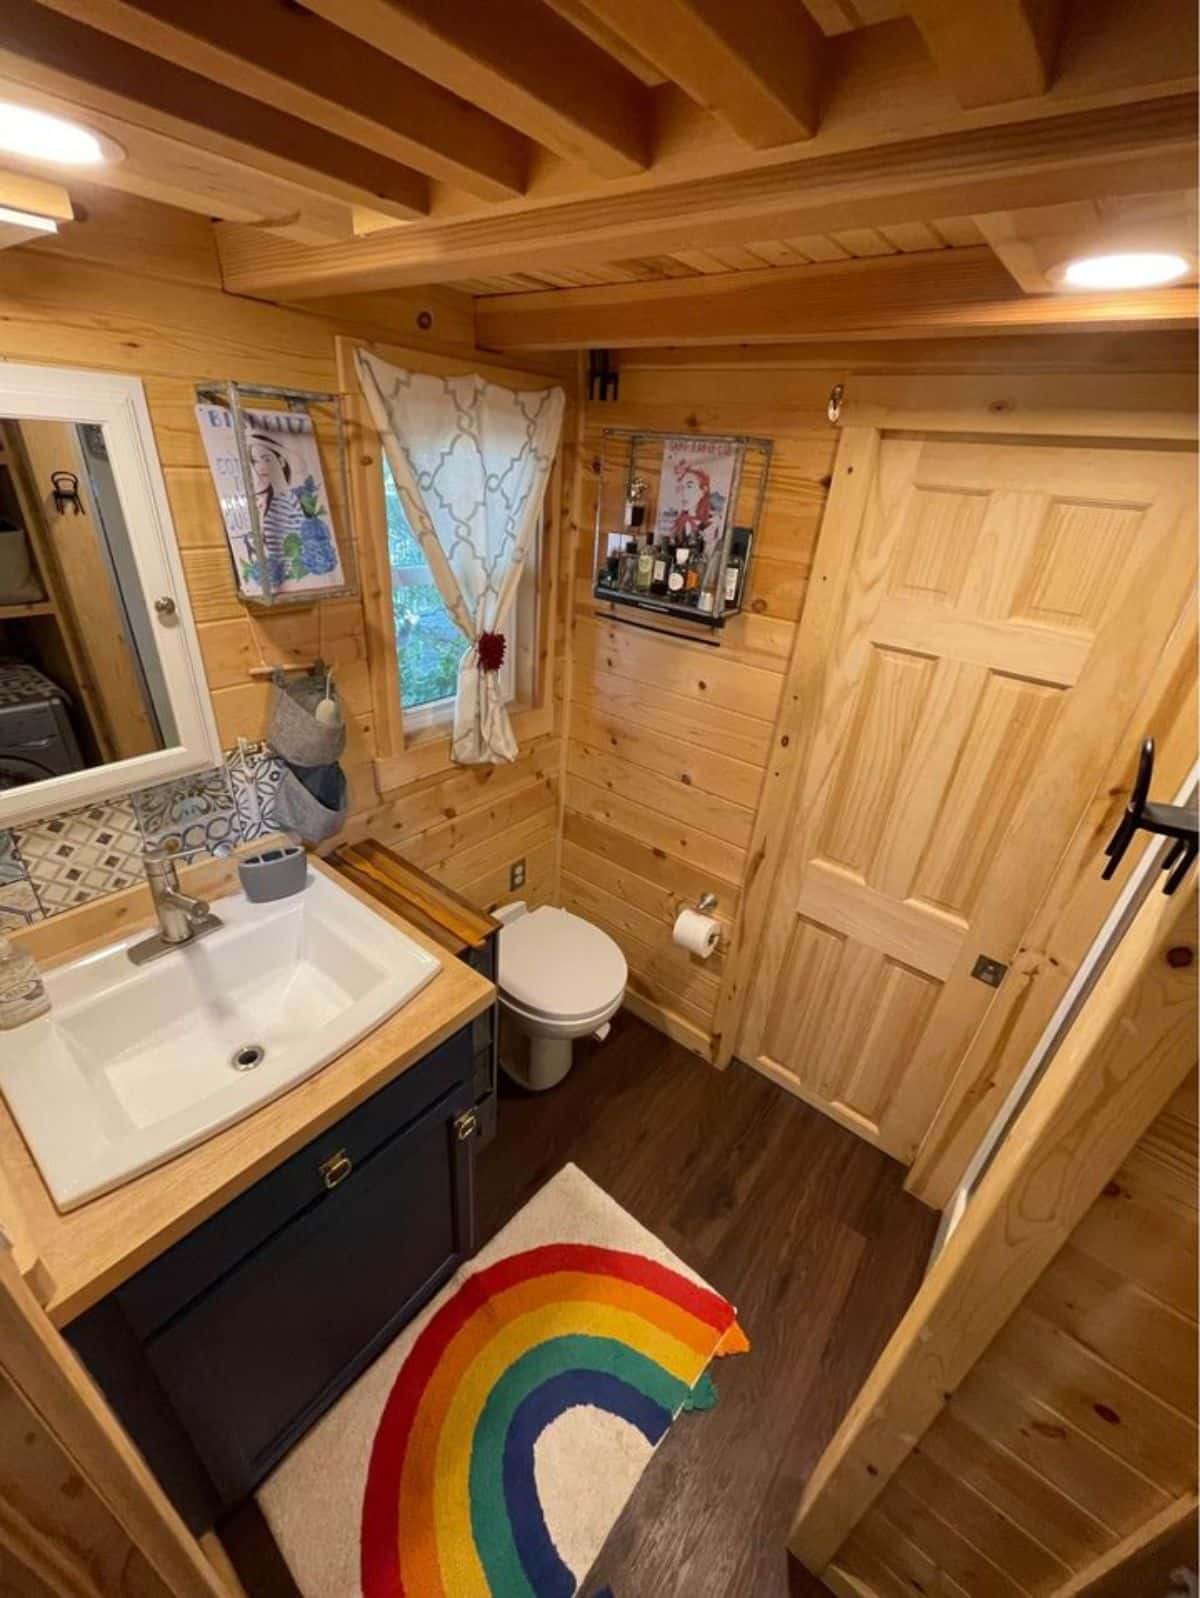 Standard toilet and sink with vanity & mirror in bathroom of Lakefront Tiny House